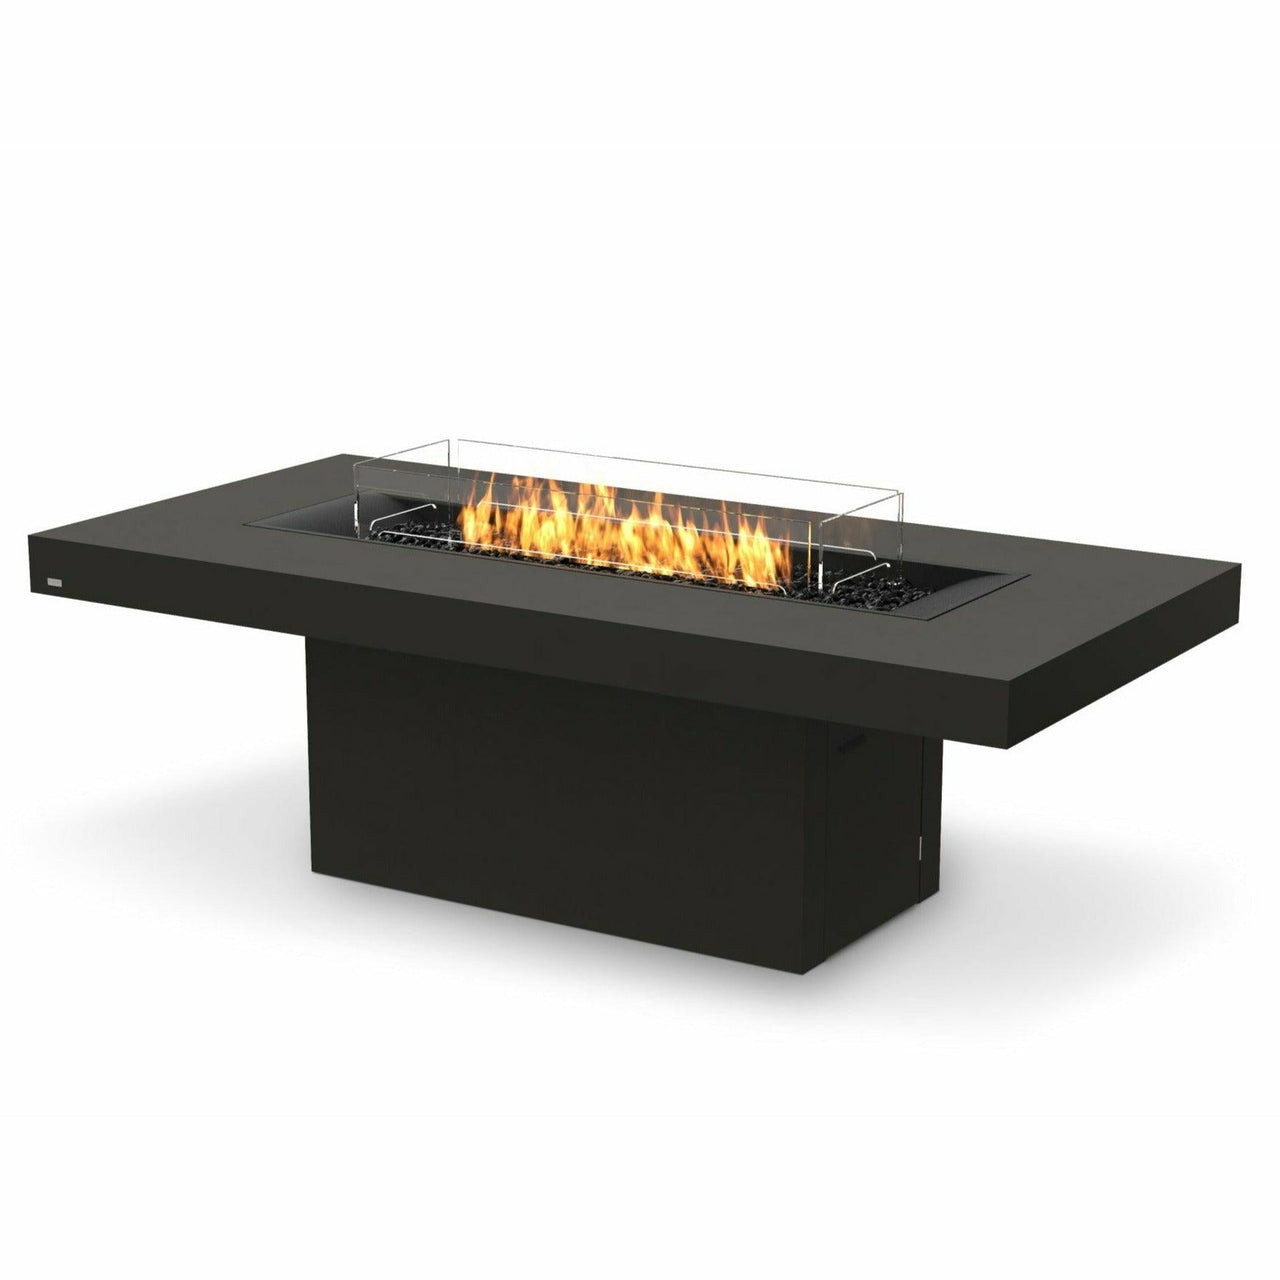 EcoSmart Fire - Gin 90" (Dining) Rectangular Concrete Fire Pit Table - Fire Pit Stock